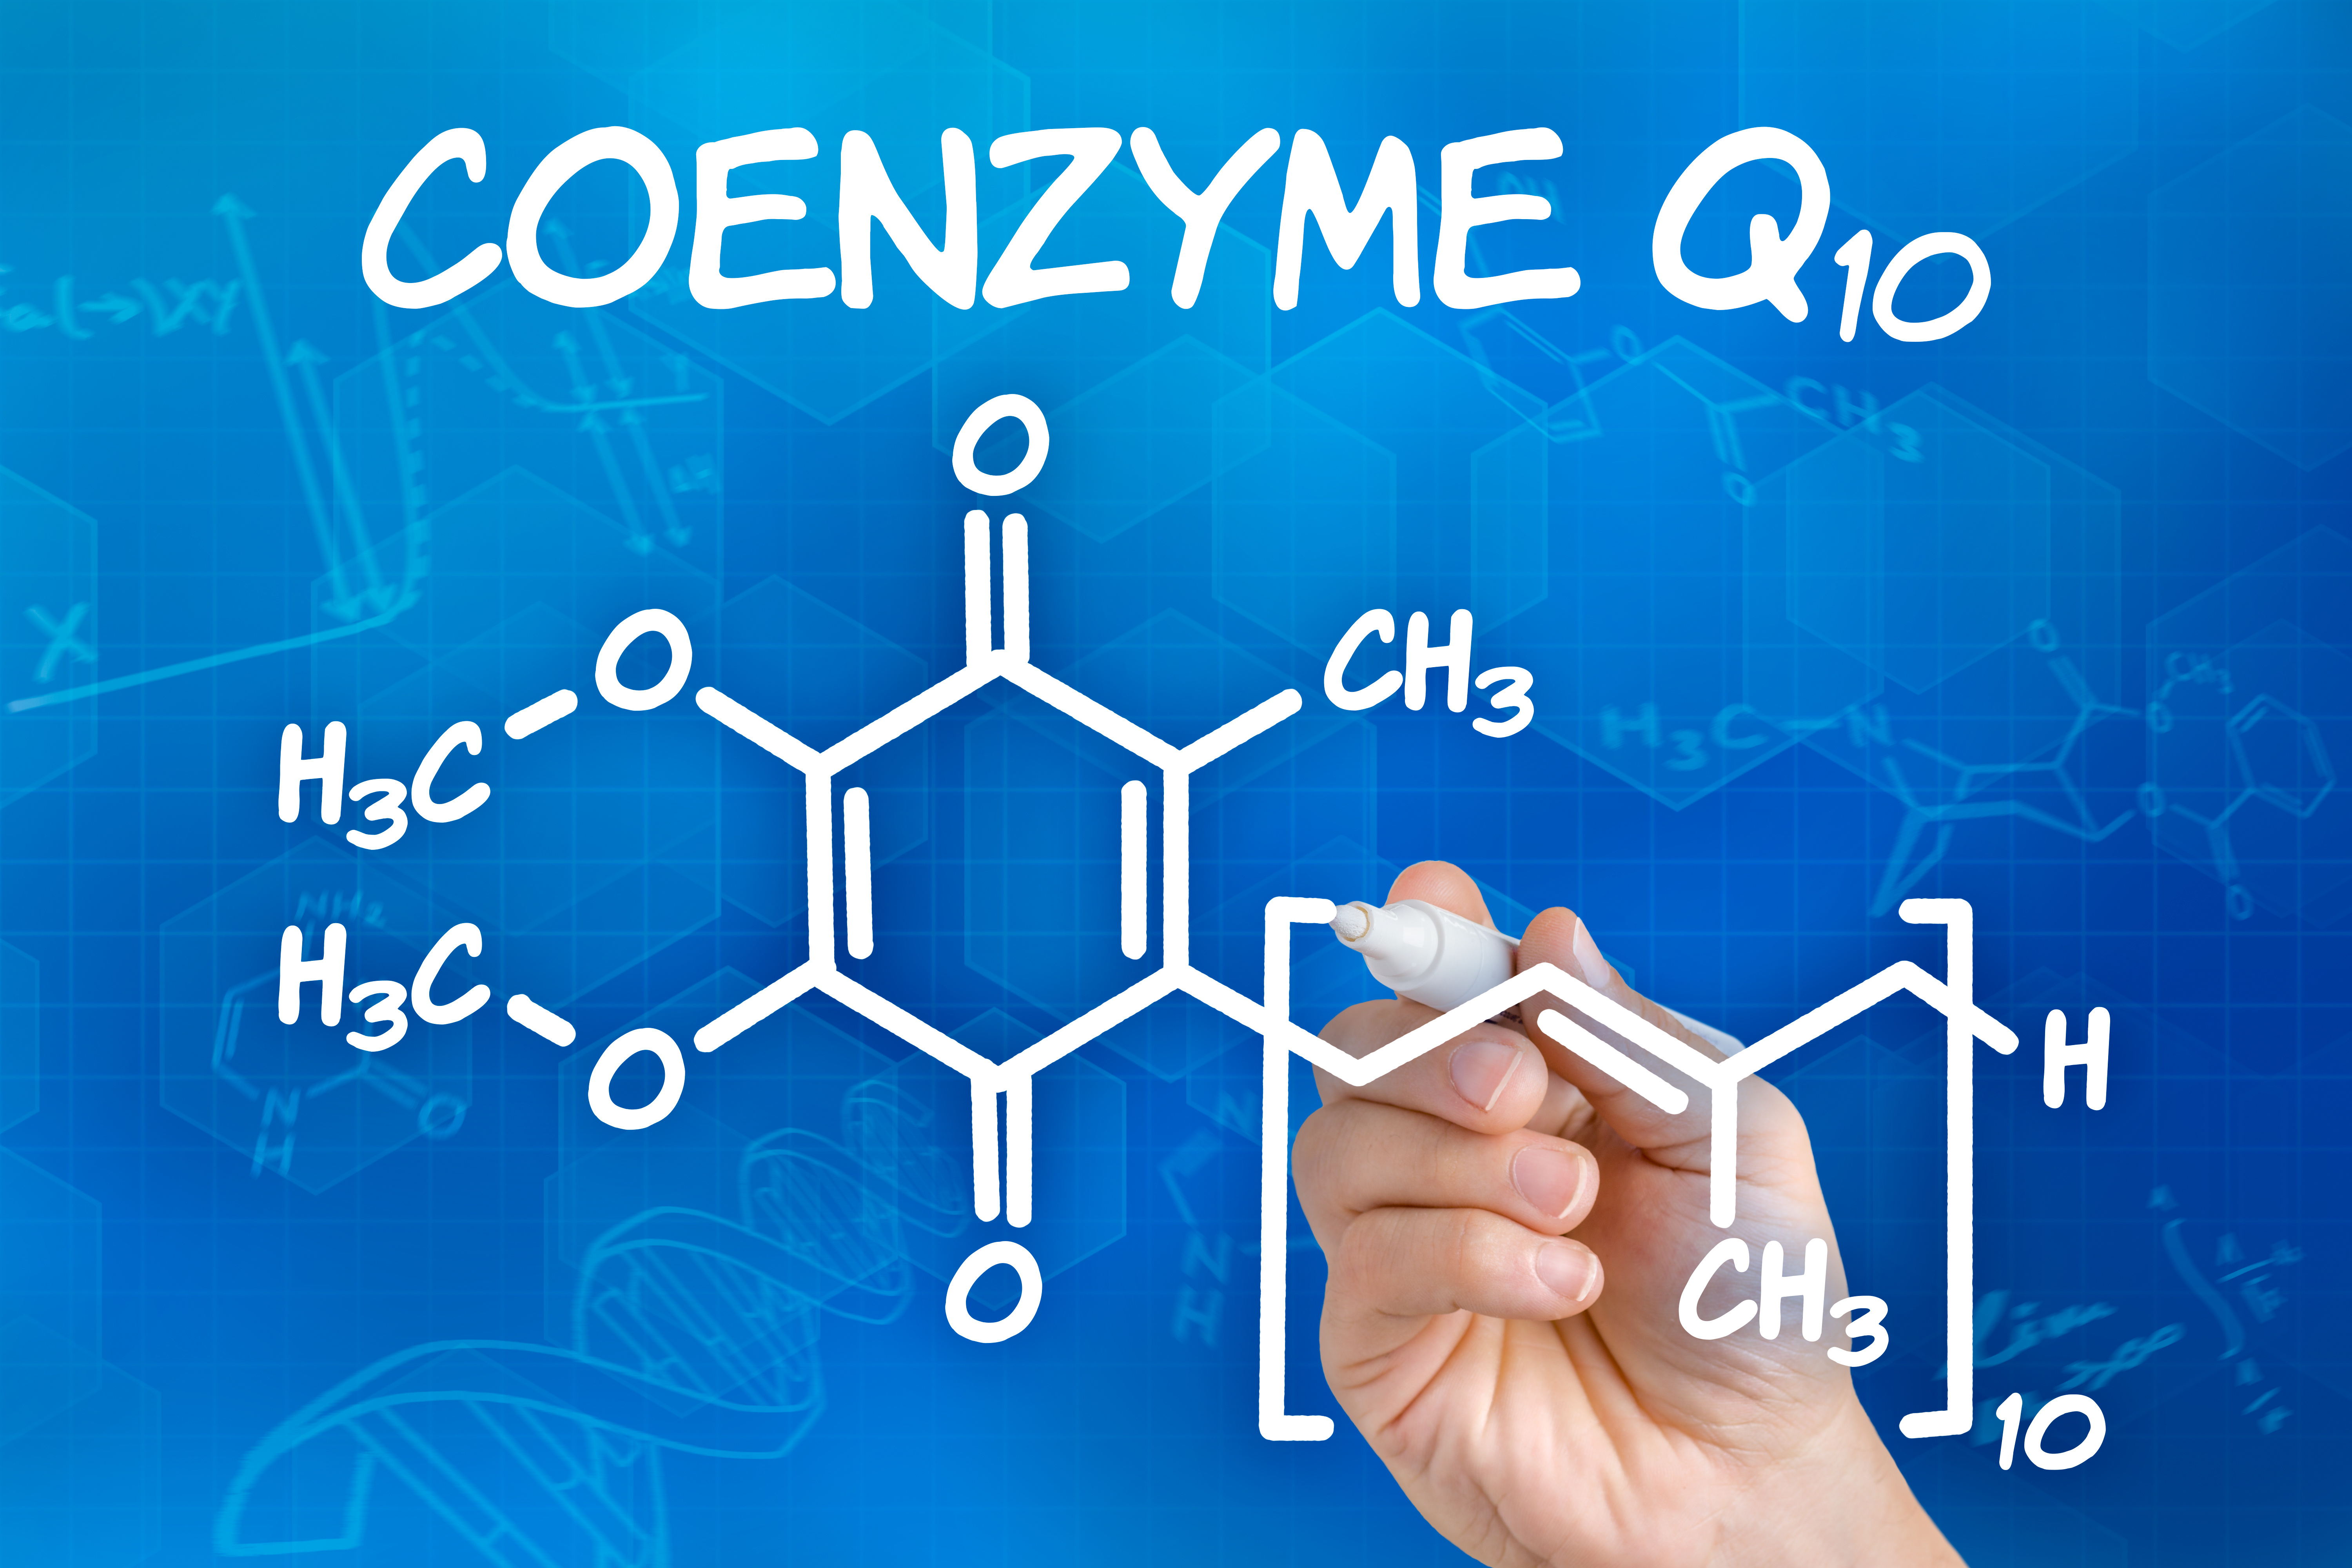 What is Coenzyme Q 10?